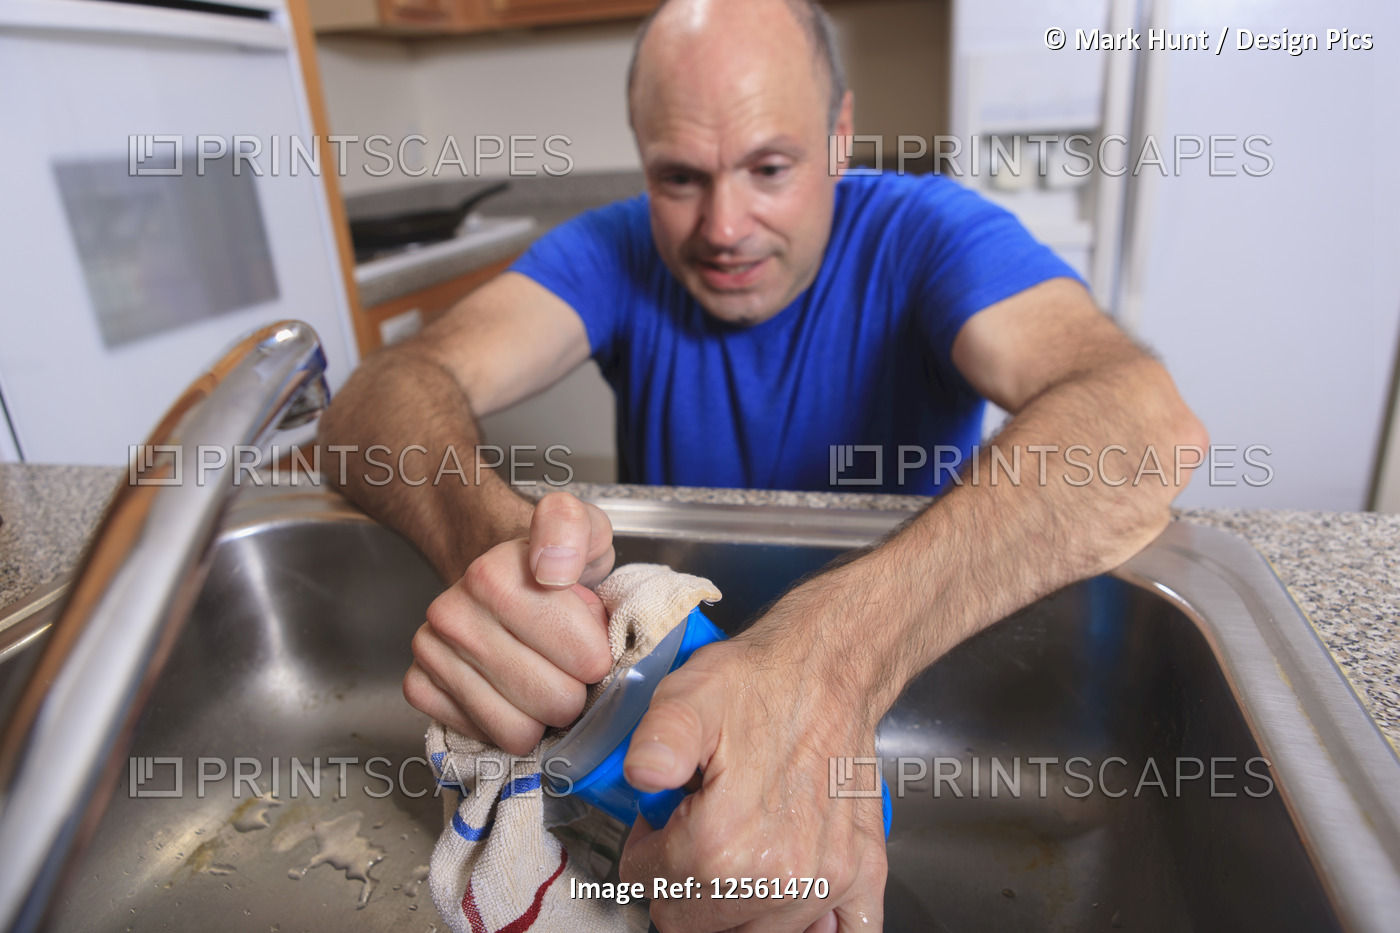 Man with Friedreich's Ataxia and deformed hands washing dishes in his kitchen ...